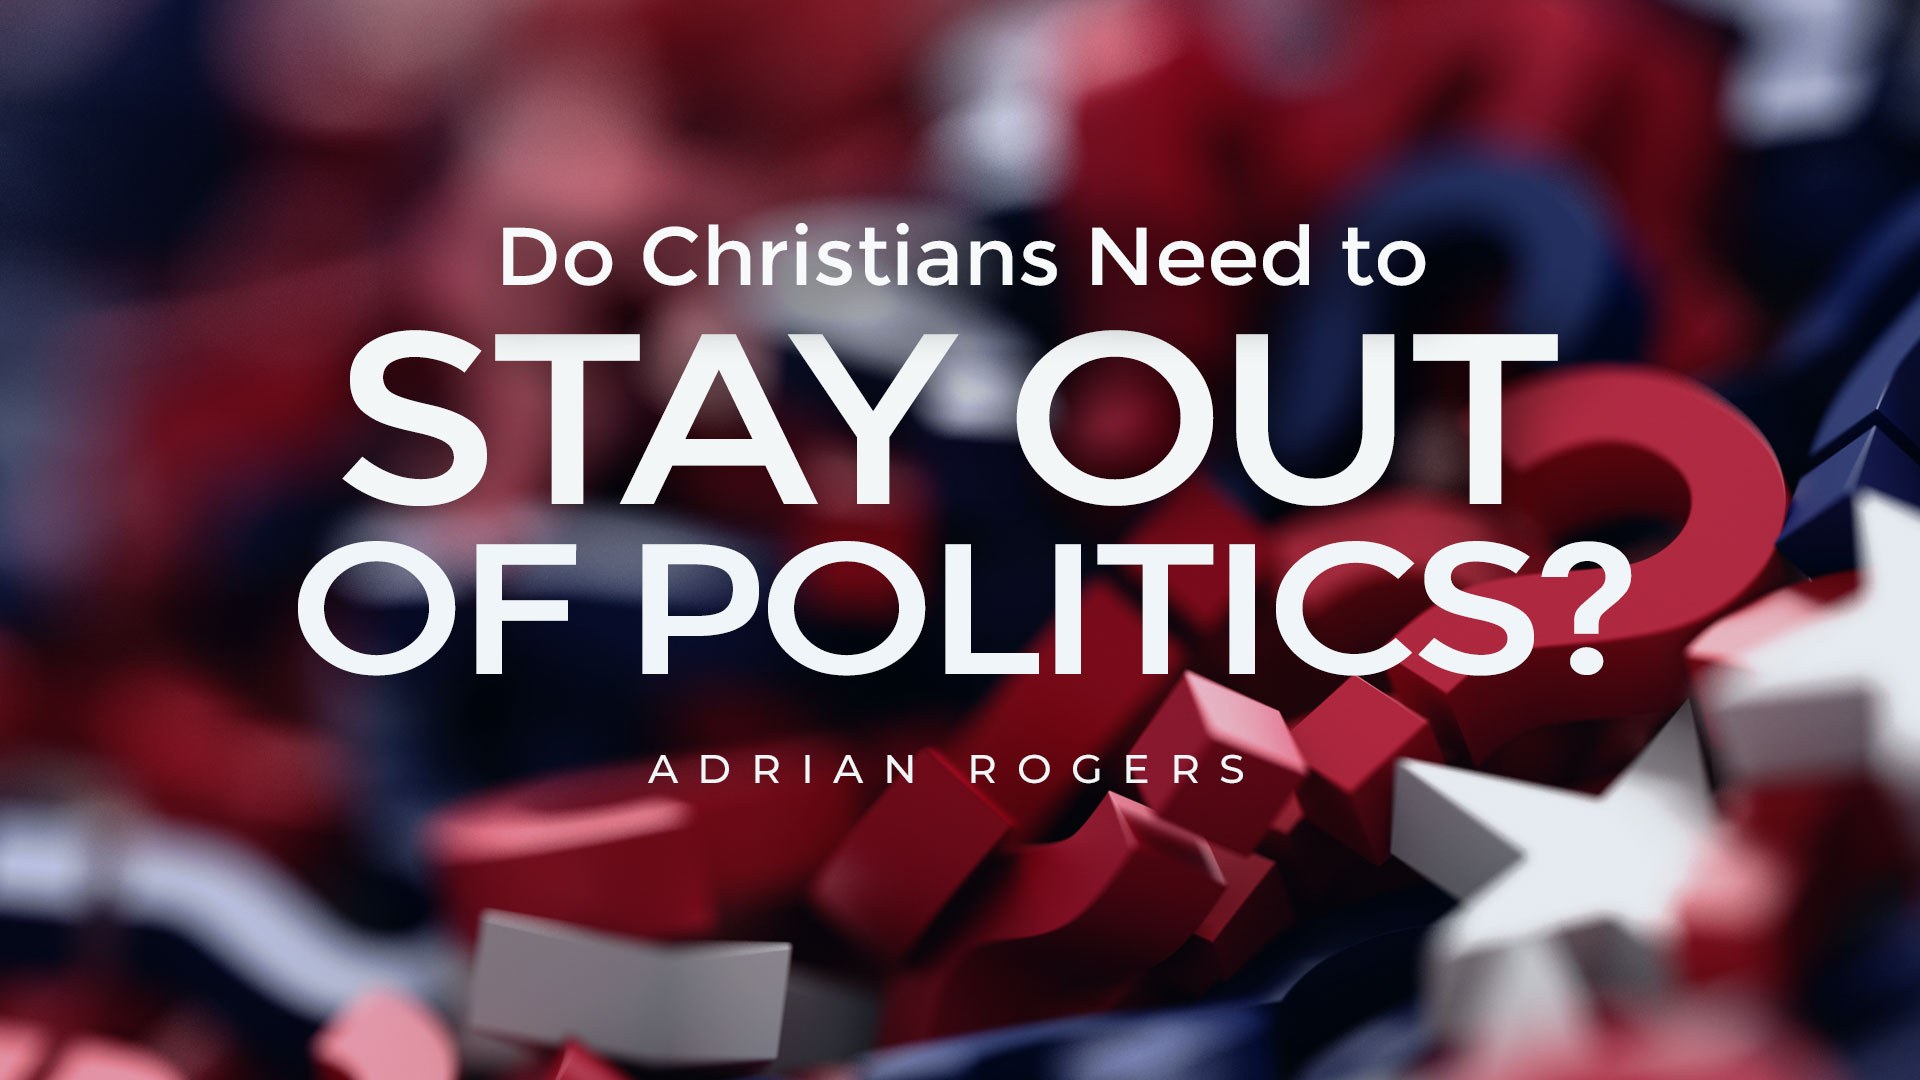 Do Christians Need to Stay Out of Politics?